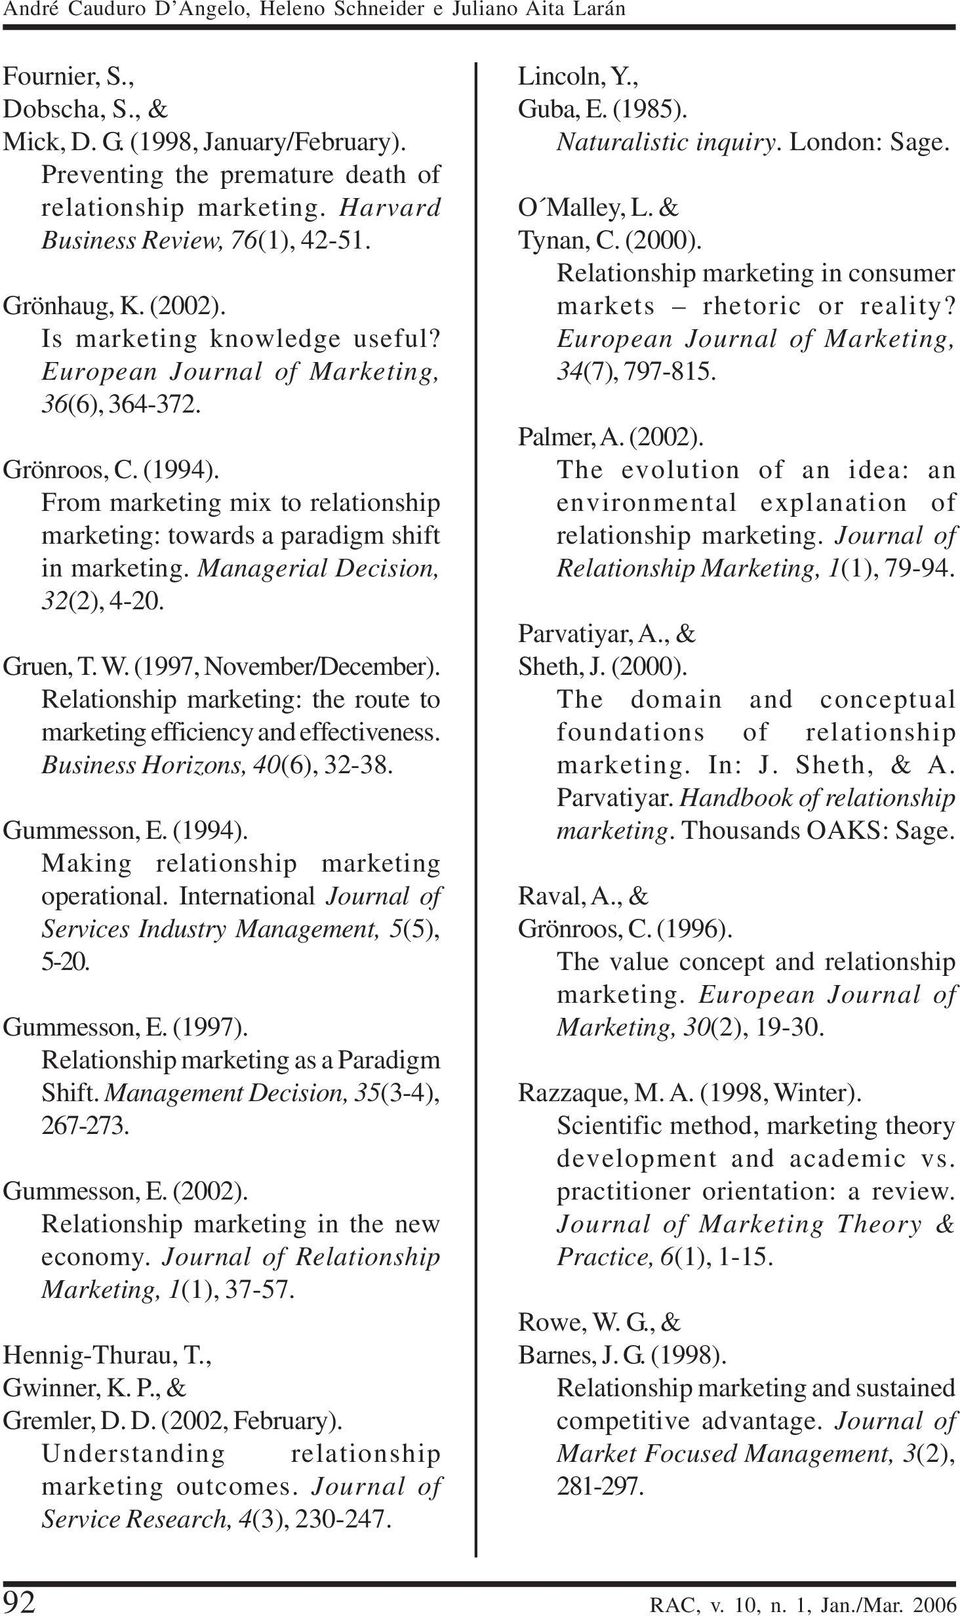 From marketing mix to relationship marketing: towards a paradigm shift in marketing. Managerial Decision, 32(2), 4-20. Gruen, T. W. (1997, November/December).